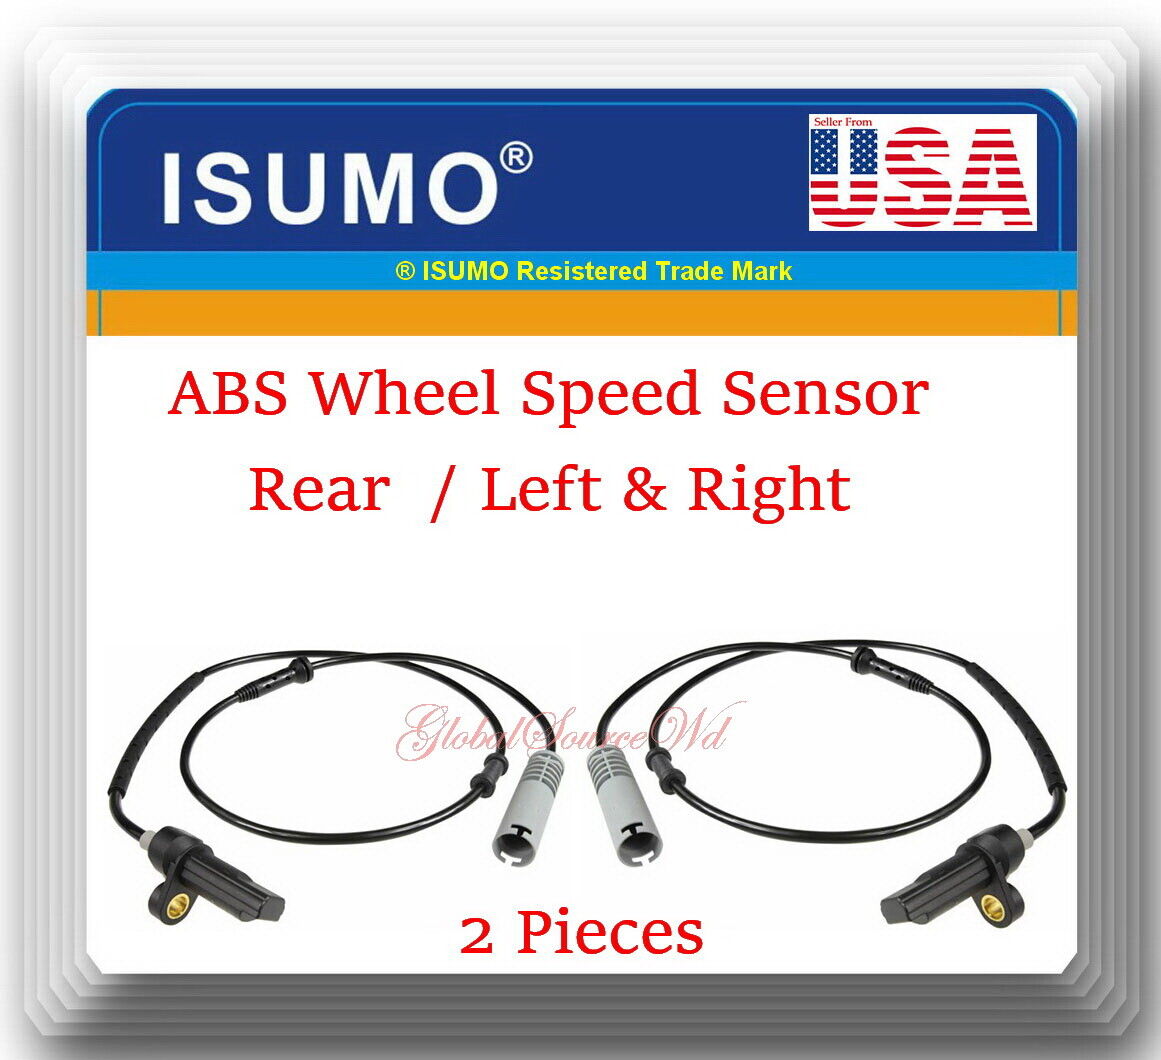 2 x ABS Wheel Speed Sensor Rear Left &Right For BMW 740I 740IL95-99 750IL 95-98 